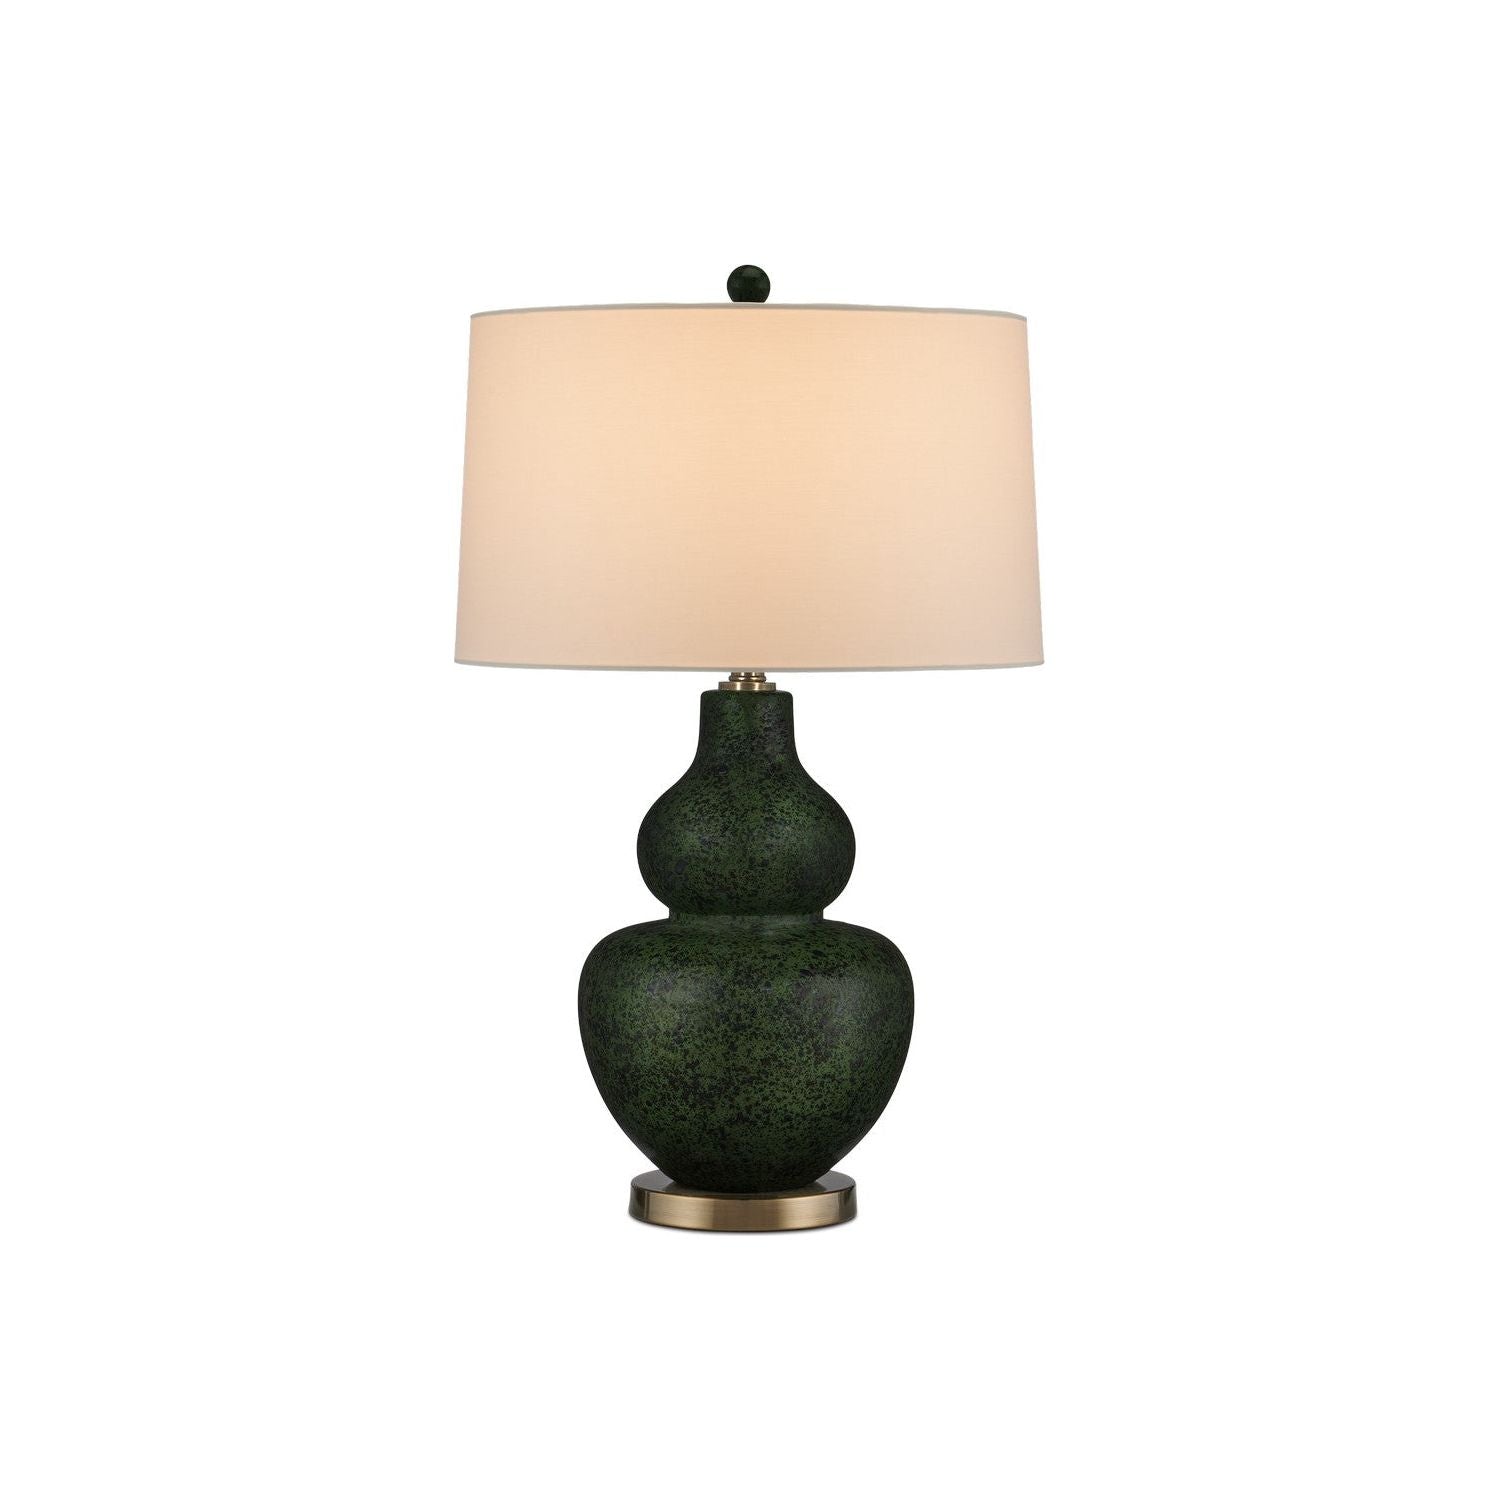 Currey and Company - 6000-0967 - One Light Table Lamp - Moss Green/Antique Brass